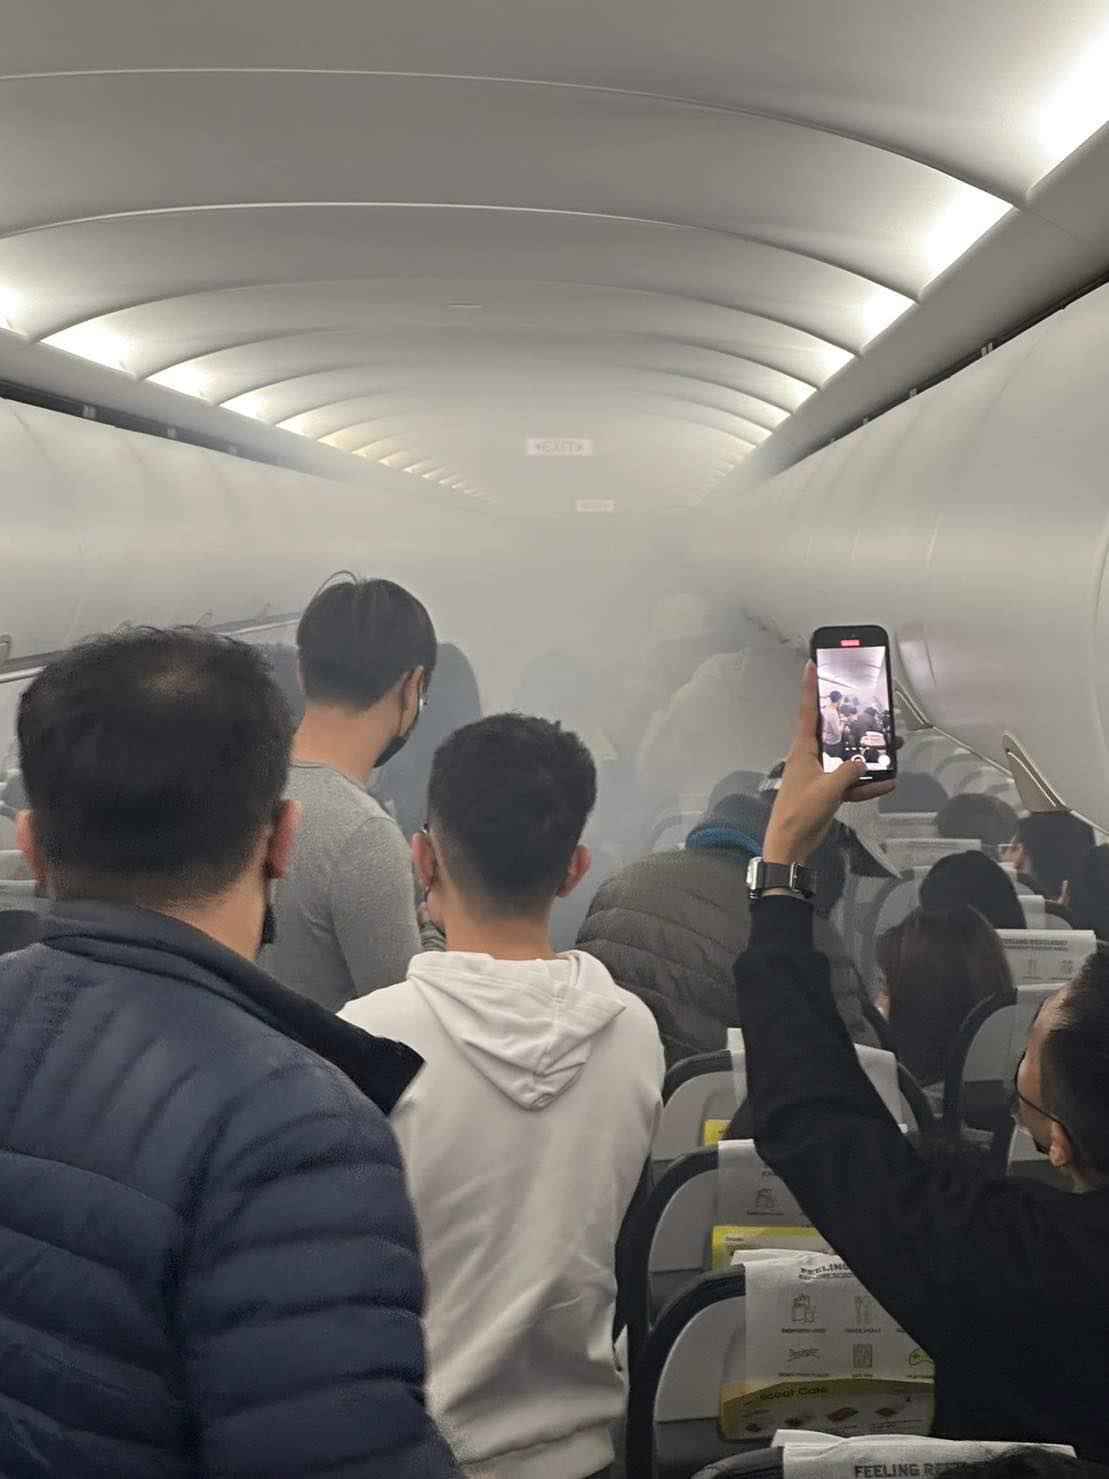 Power bank catches fire on Scoot plane before takeoff from Taiwan to  S'pore, 2 suffer minor burns - Mothership.SG - News from Singapore, Asia  and around the world